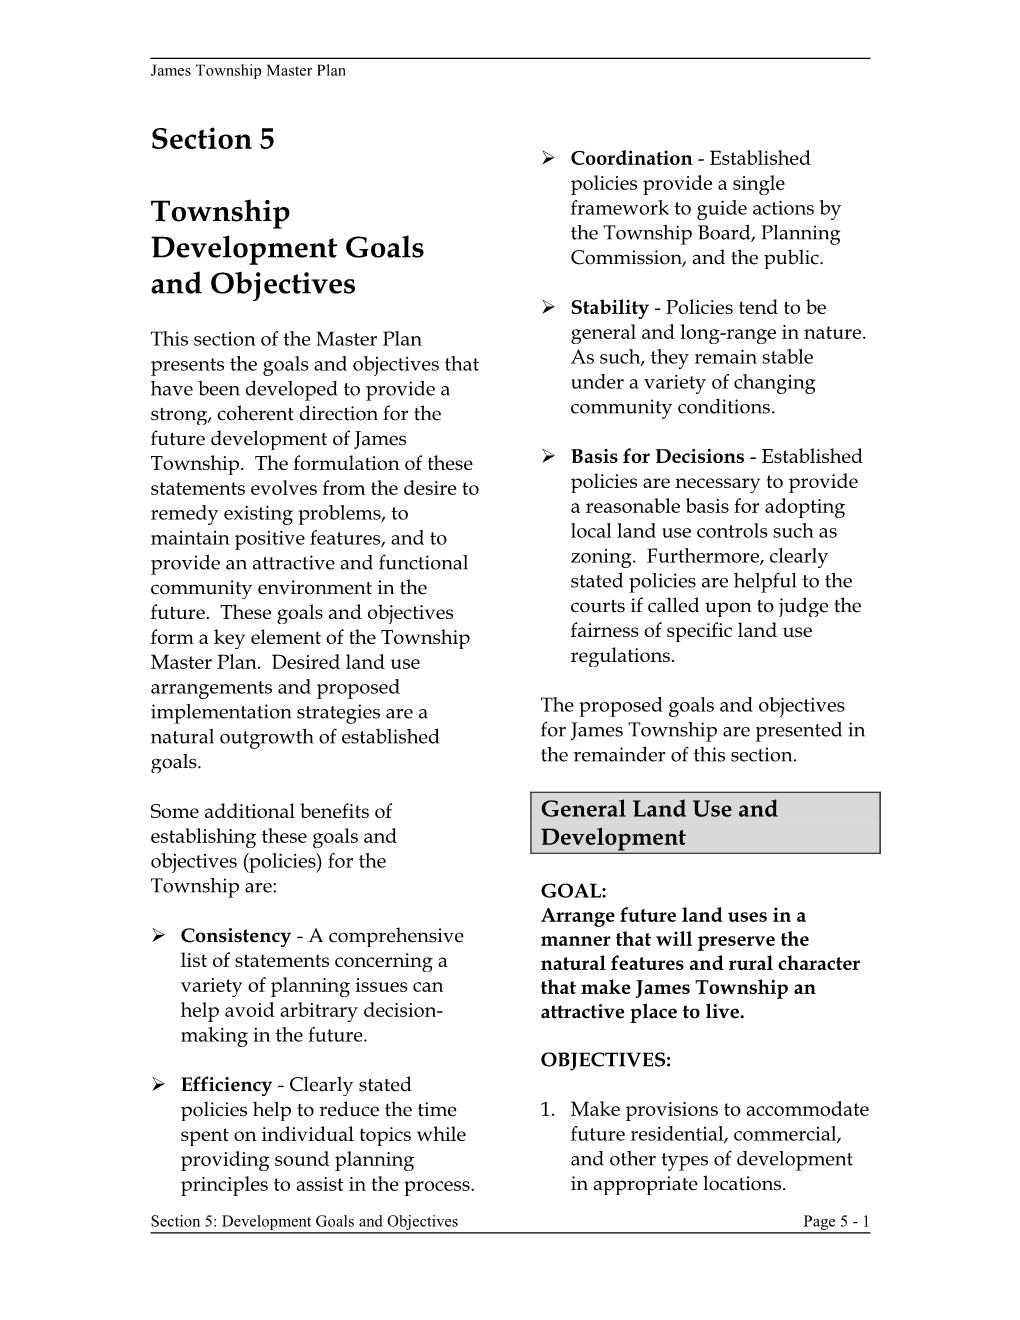 Section 5 Township Development Goals and Objectives